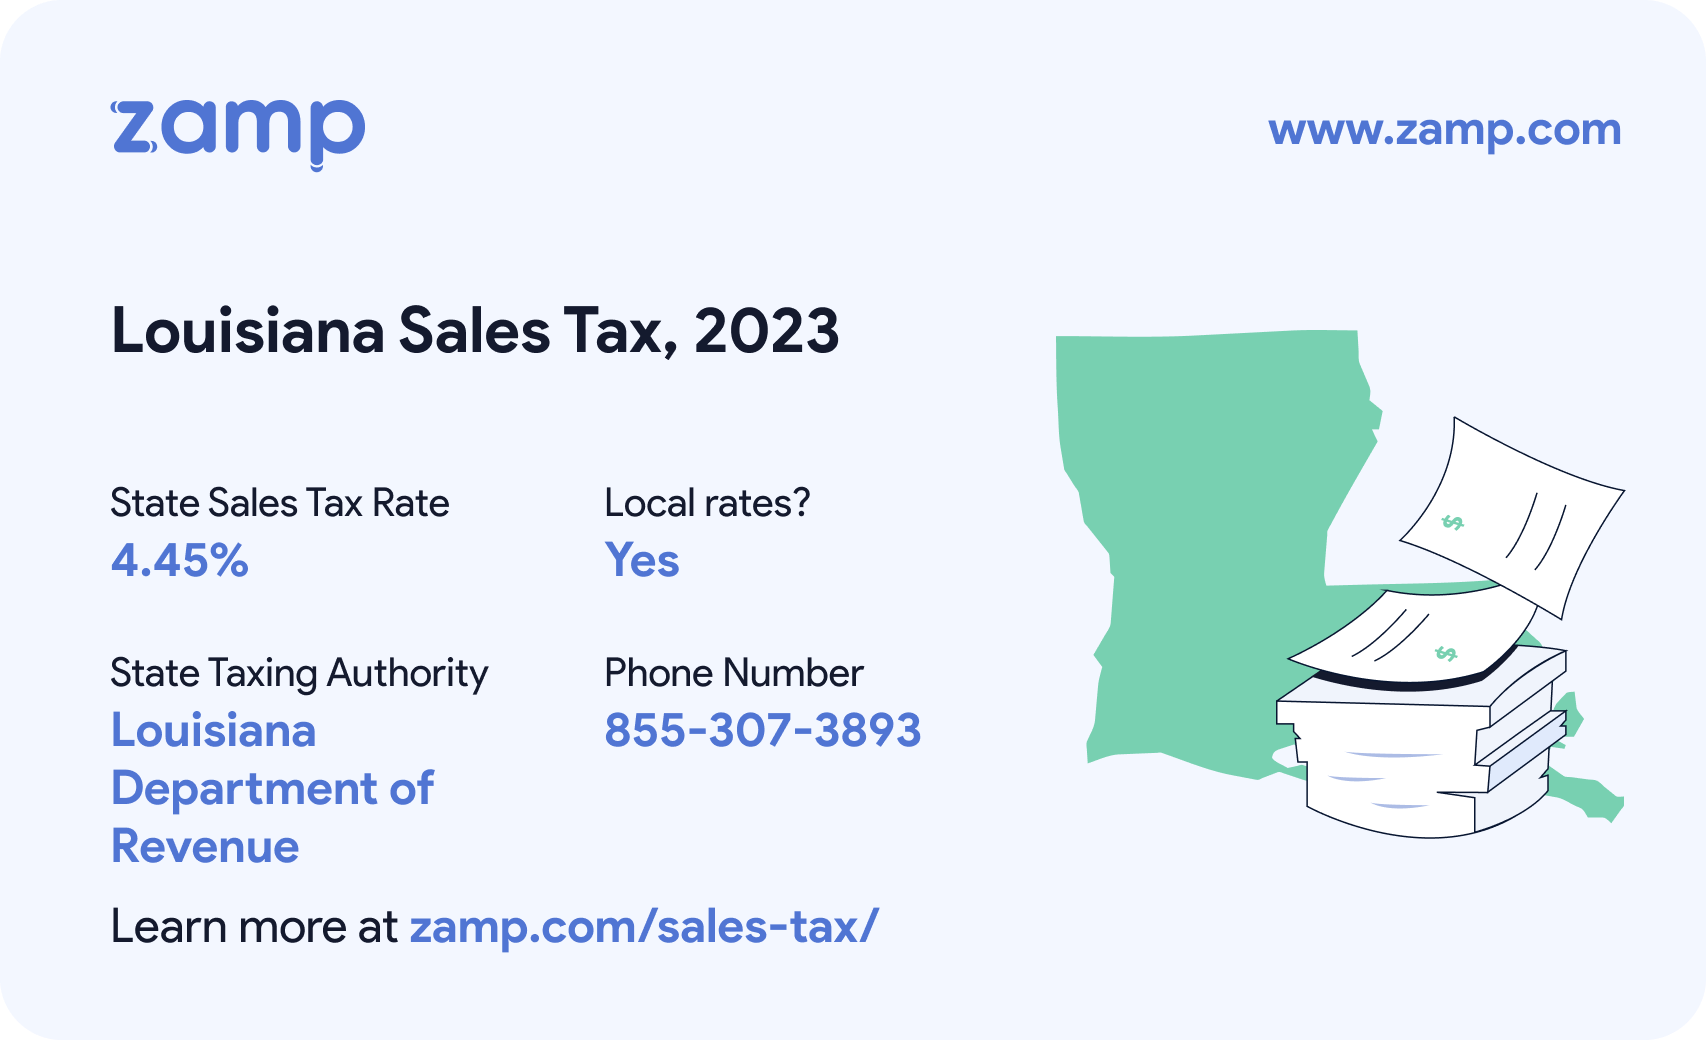 Louisiana basic sales tax info for 2023 - State sales tax rate: 4.45%, Local rates? Yes; State Taxing Authority: Louisiana Department of Revenue; and phone number 855-307-3893